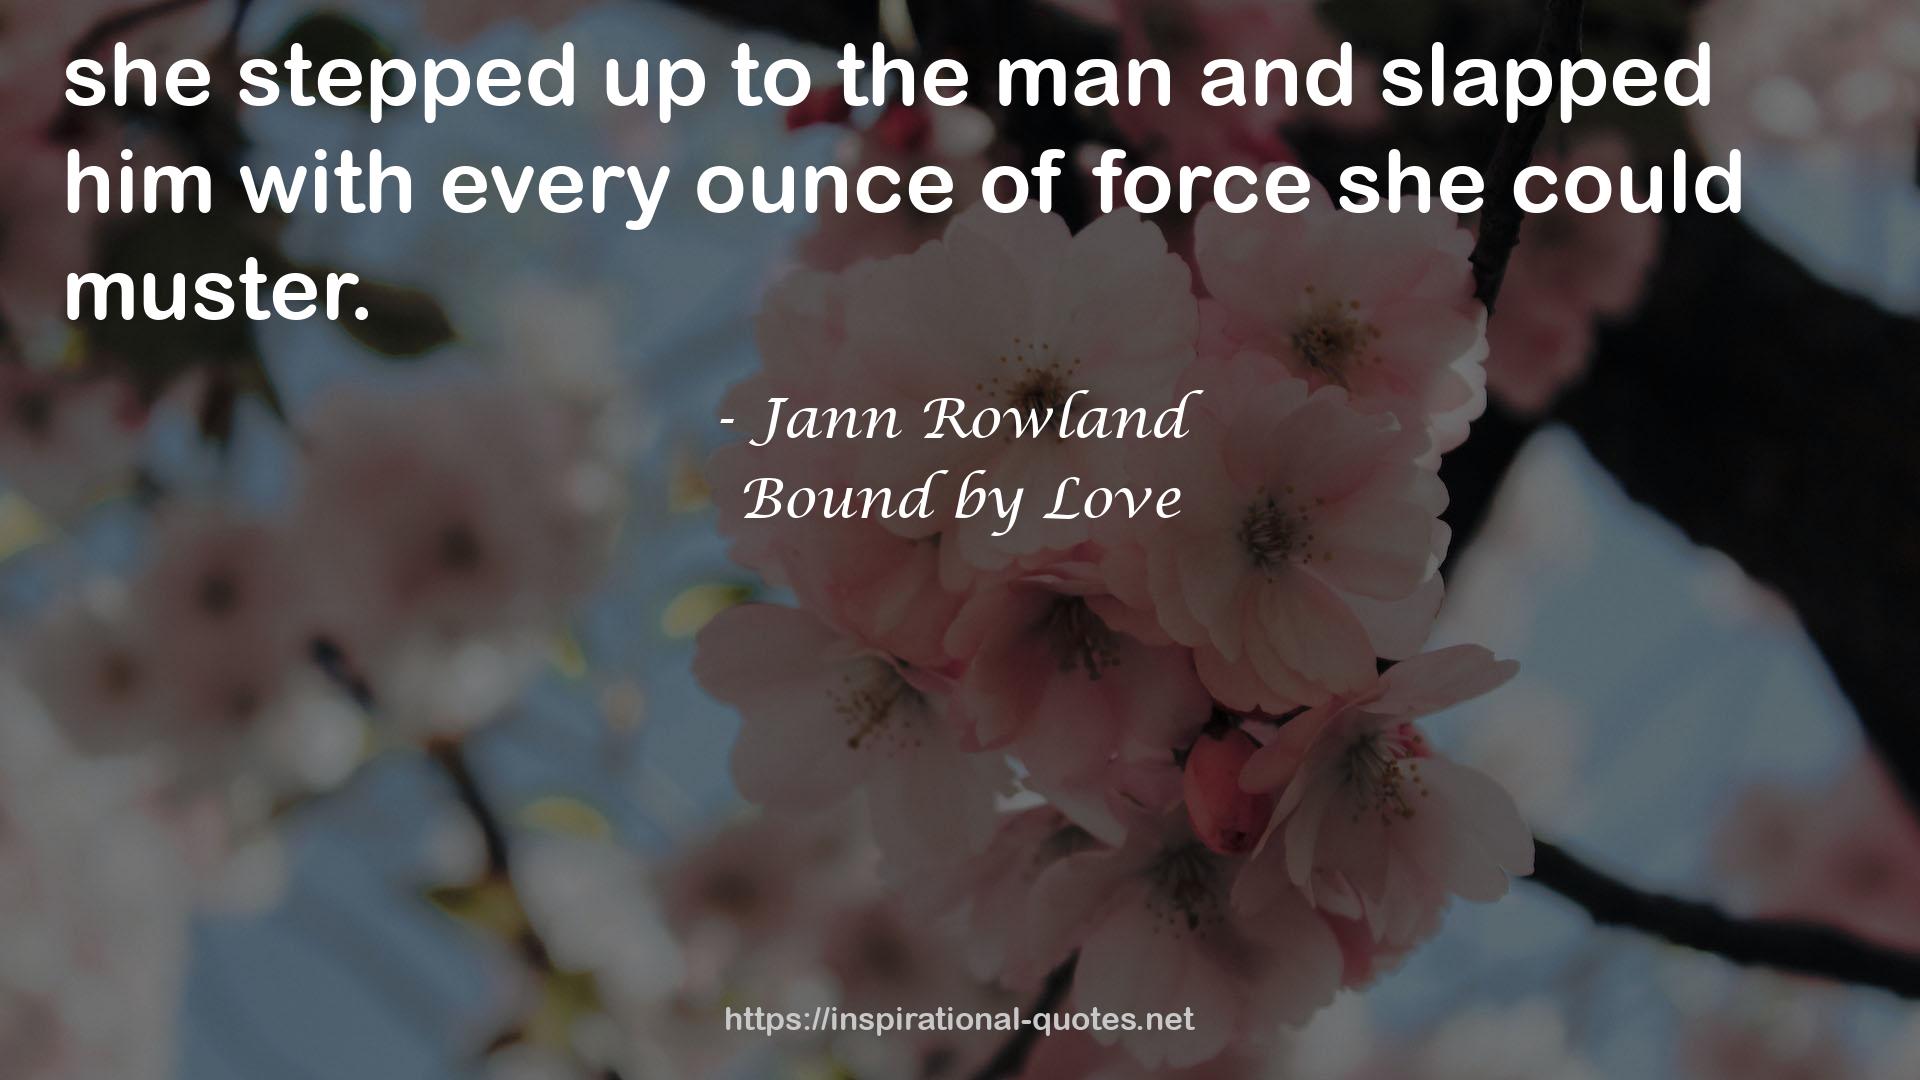 Bound by Love QUOTES